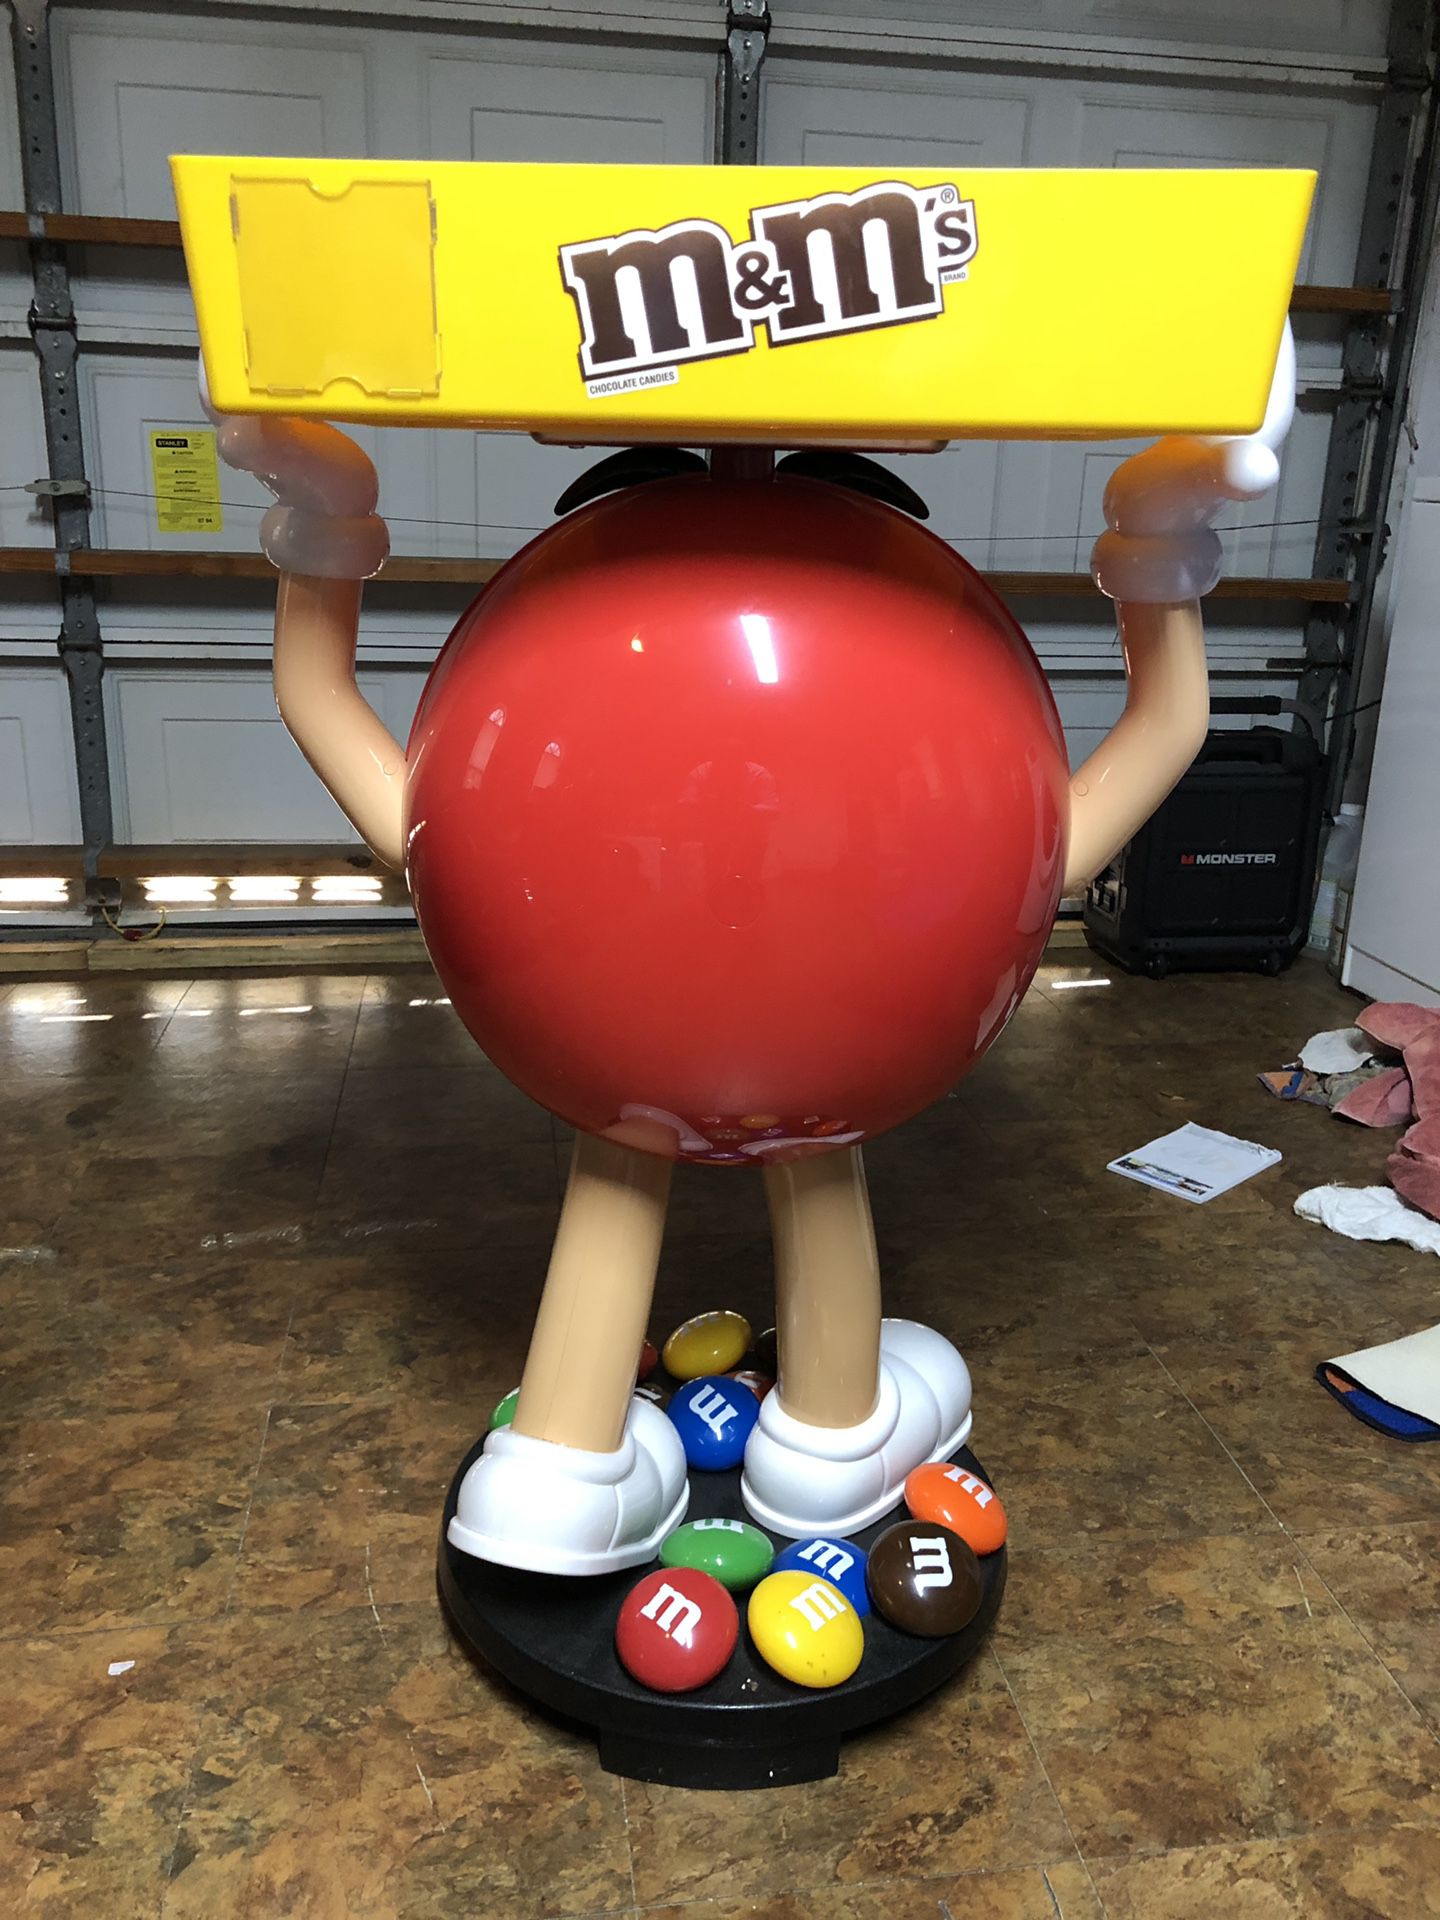 Used Yellow Peanut M&M Character Candy Store Display with Storage Tray for  Sale in Inman, SC - OfferUp